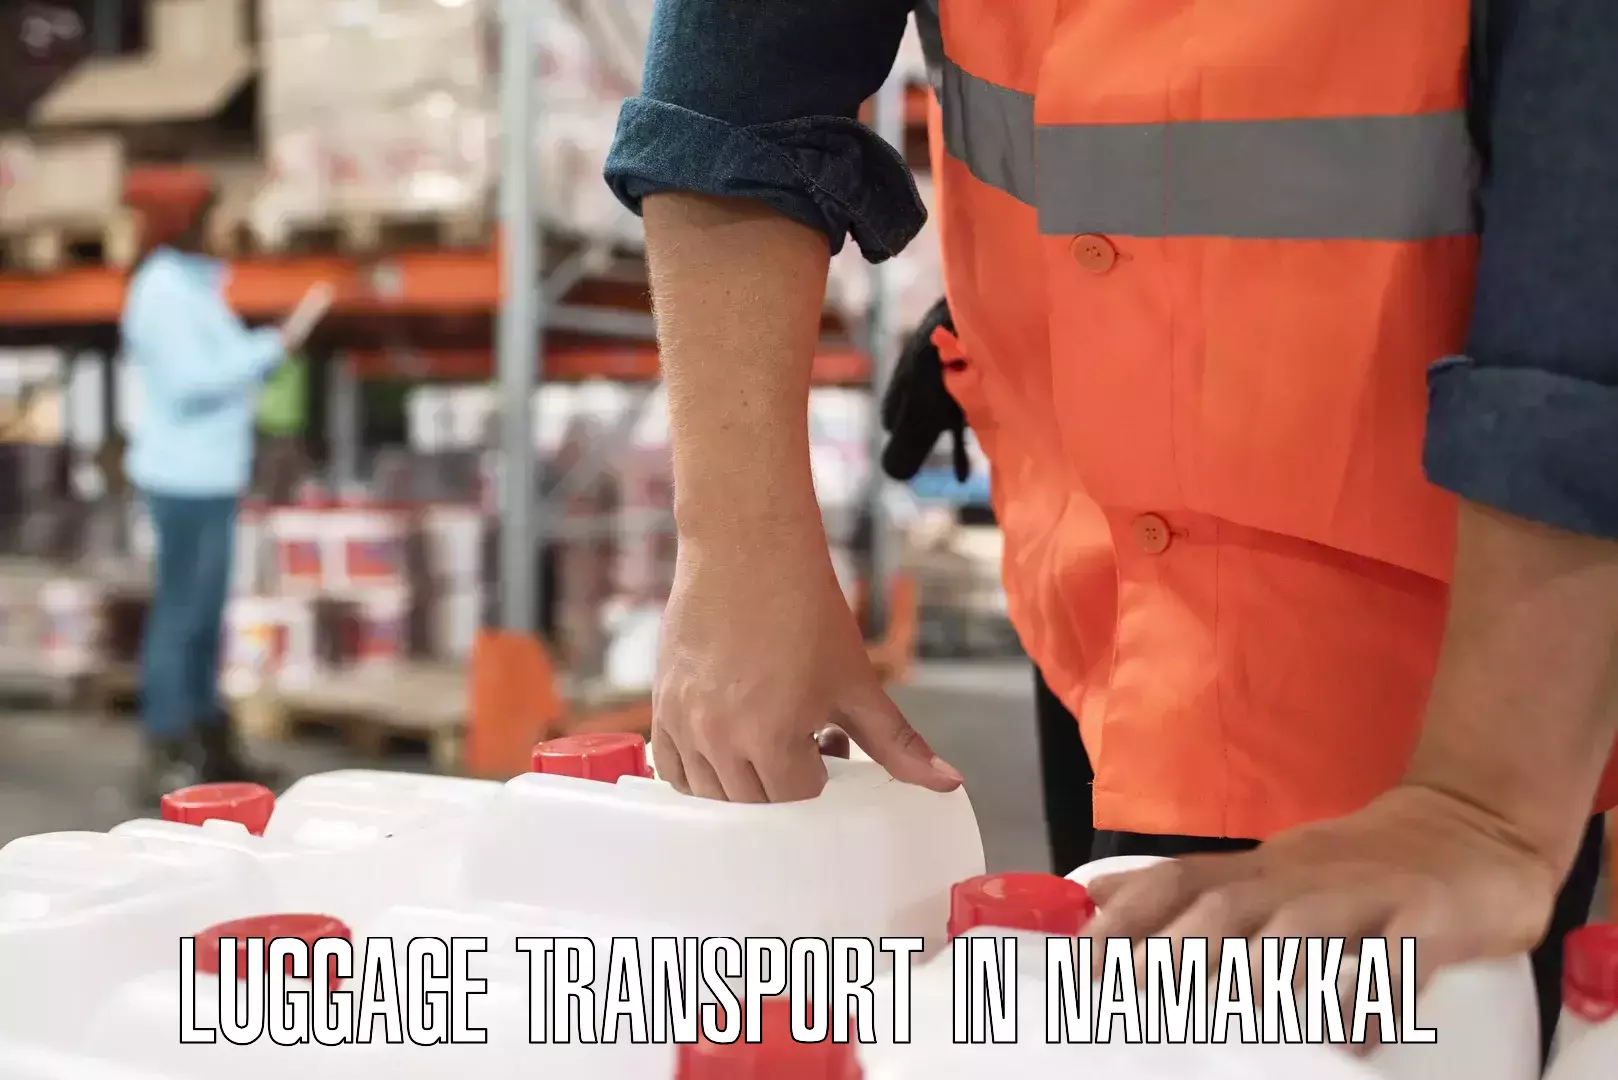 Luggage transport consultancy in Namakkal